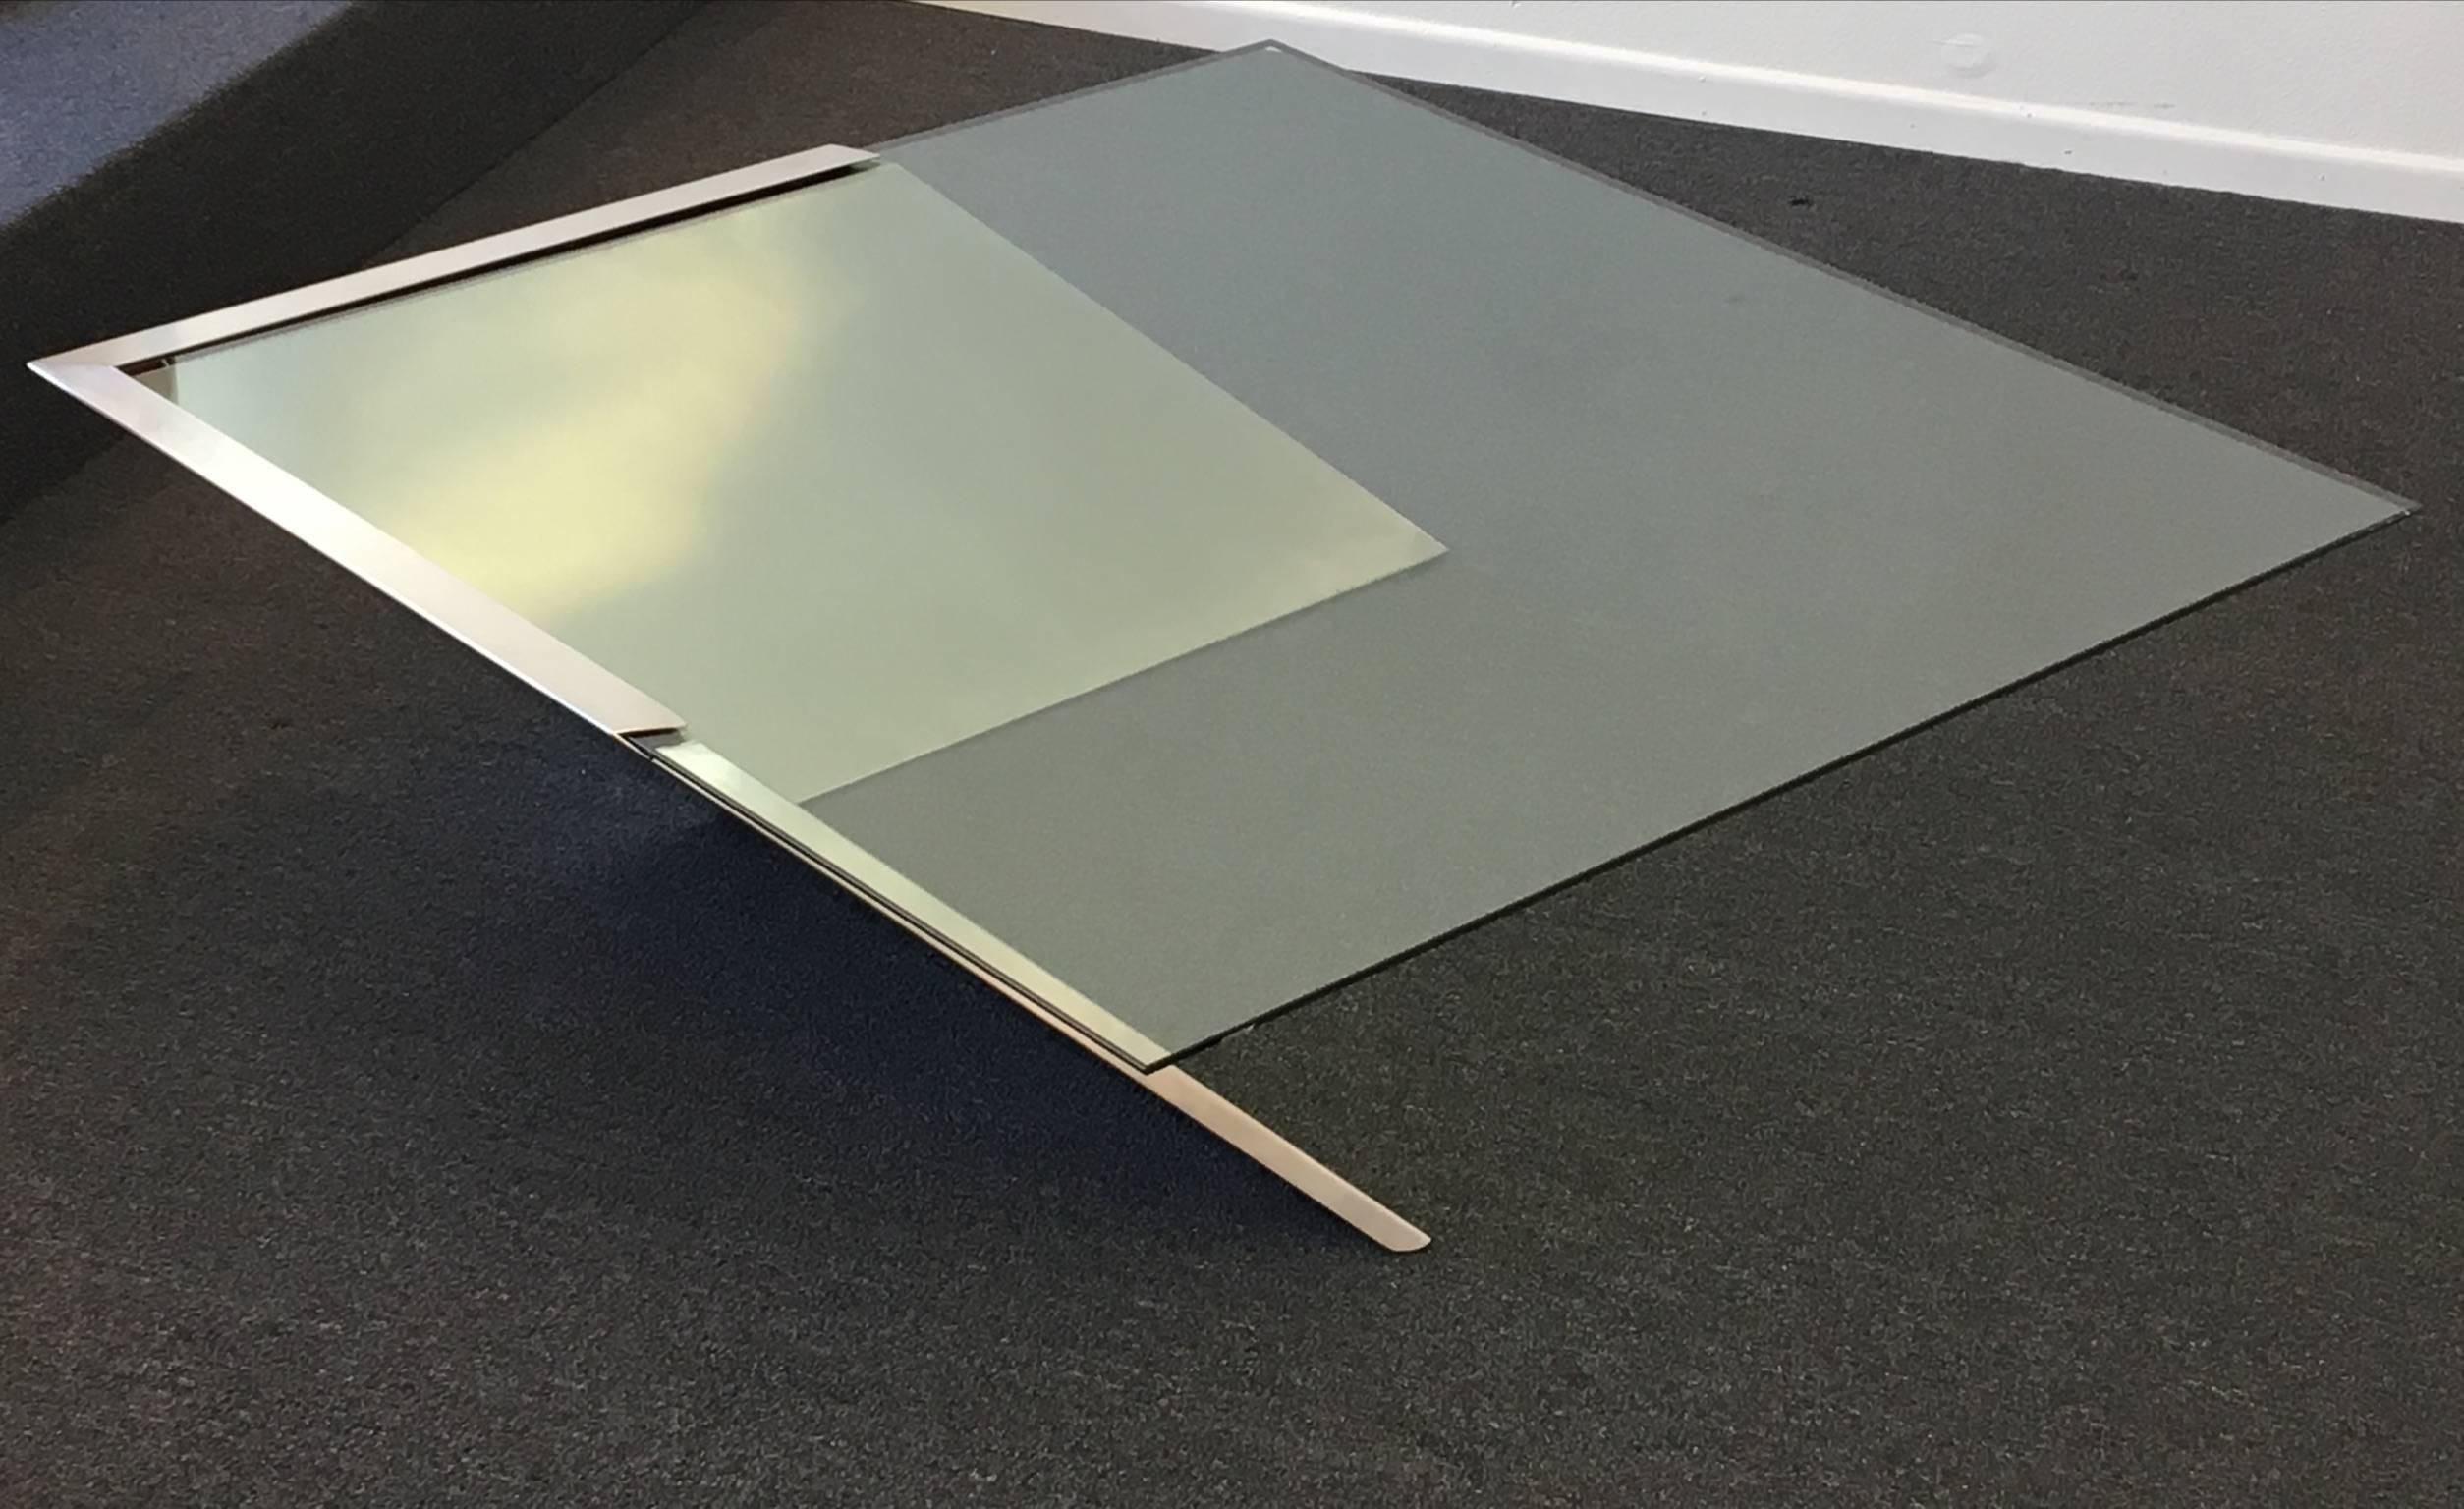 A cantilevered brushed stainless steel base with a 1/2